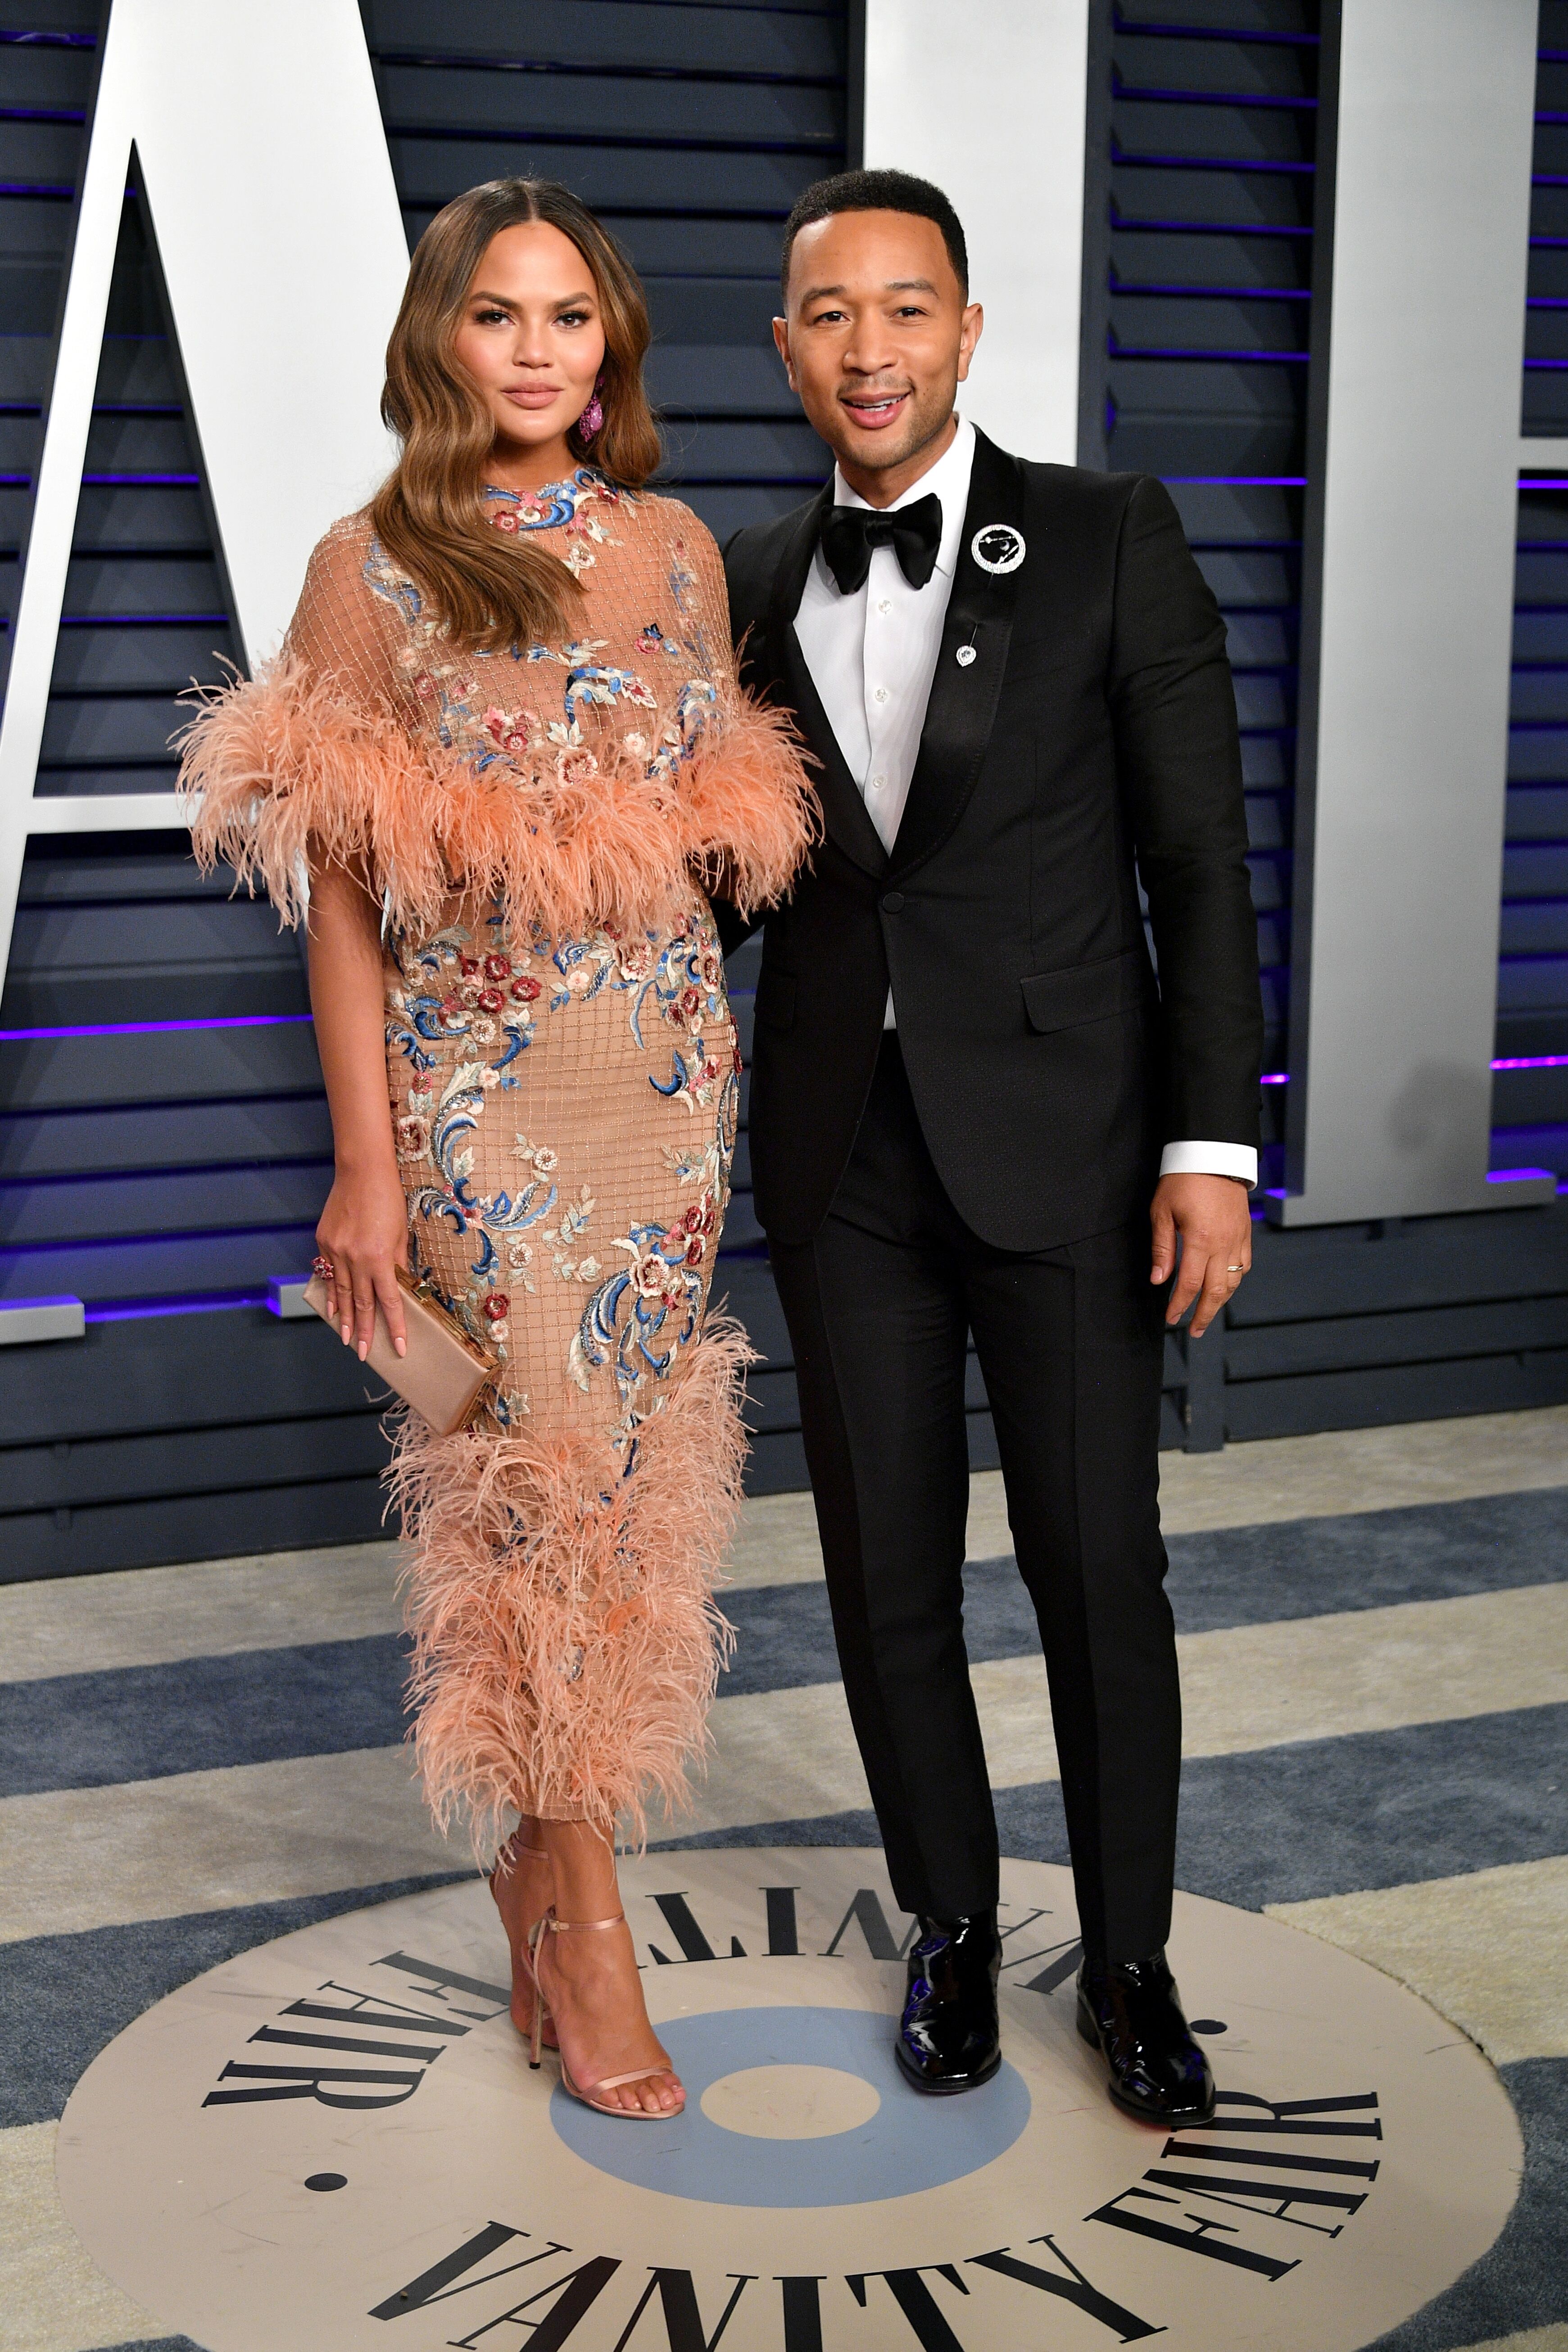  Chrissy Teigen and John Legend attend the 2019 Vanity Fair Oscar Party. | Source: Getty Images